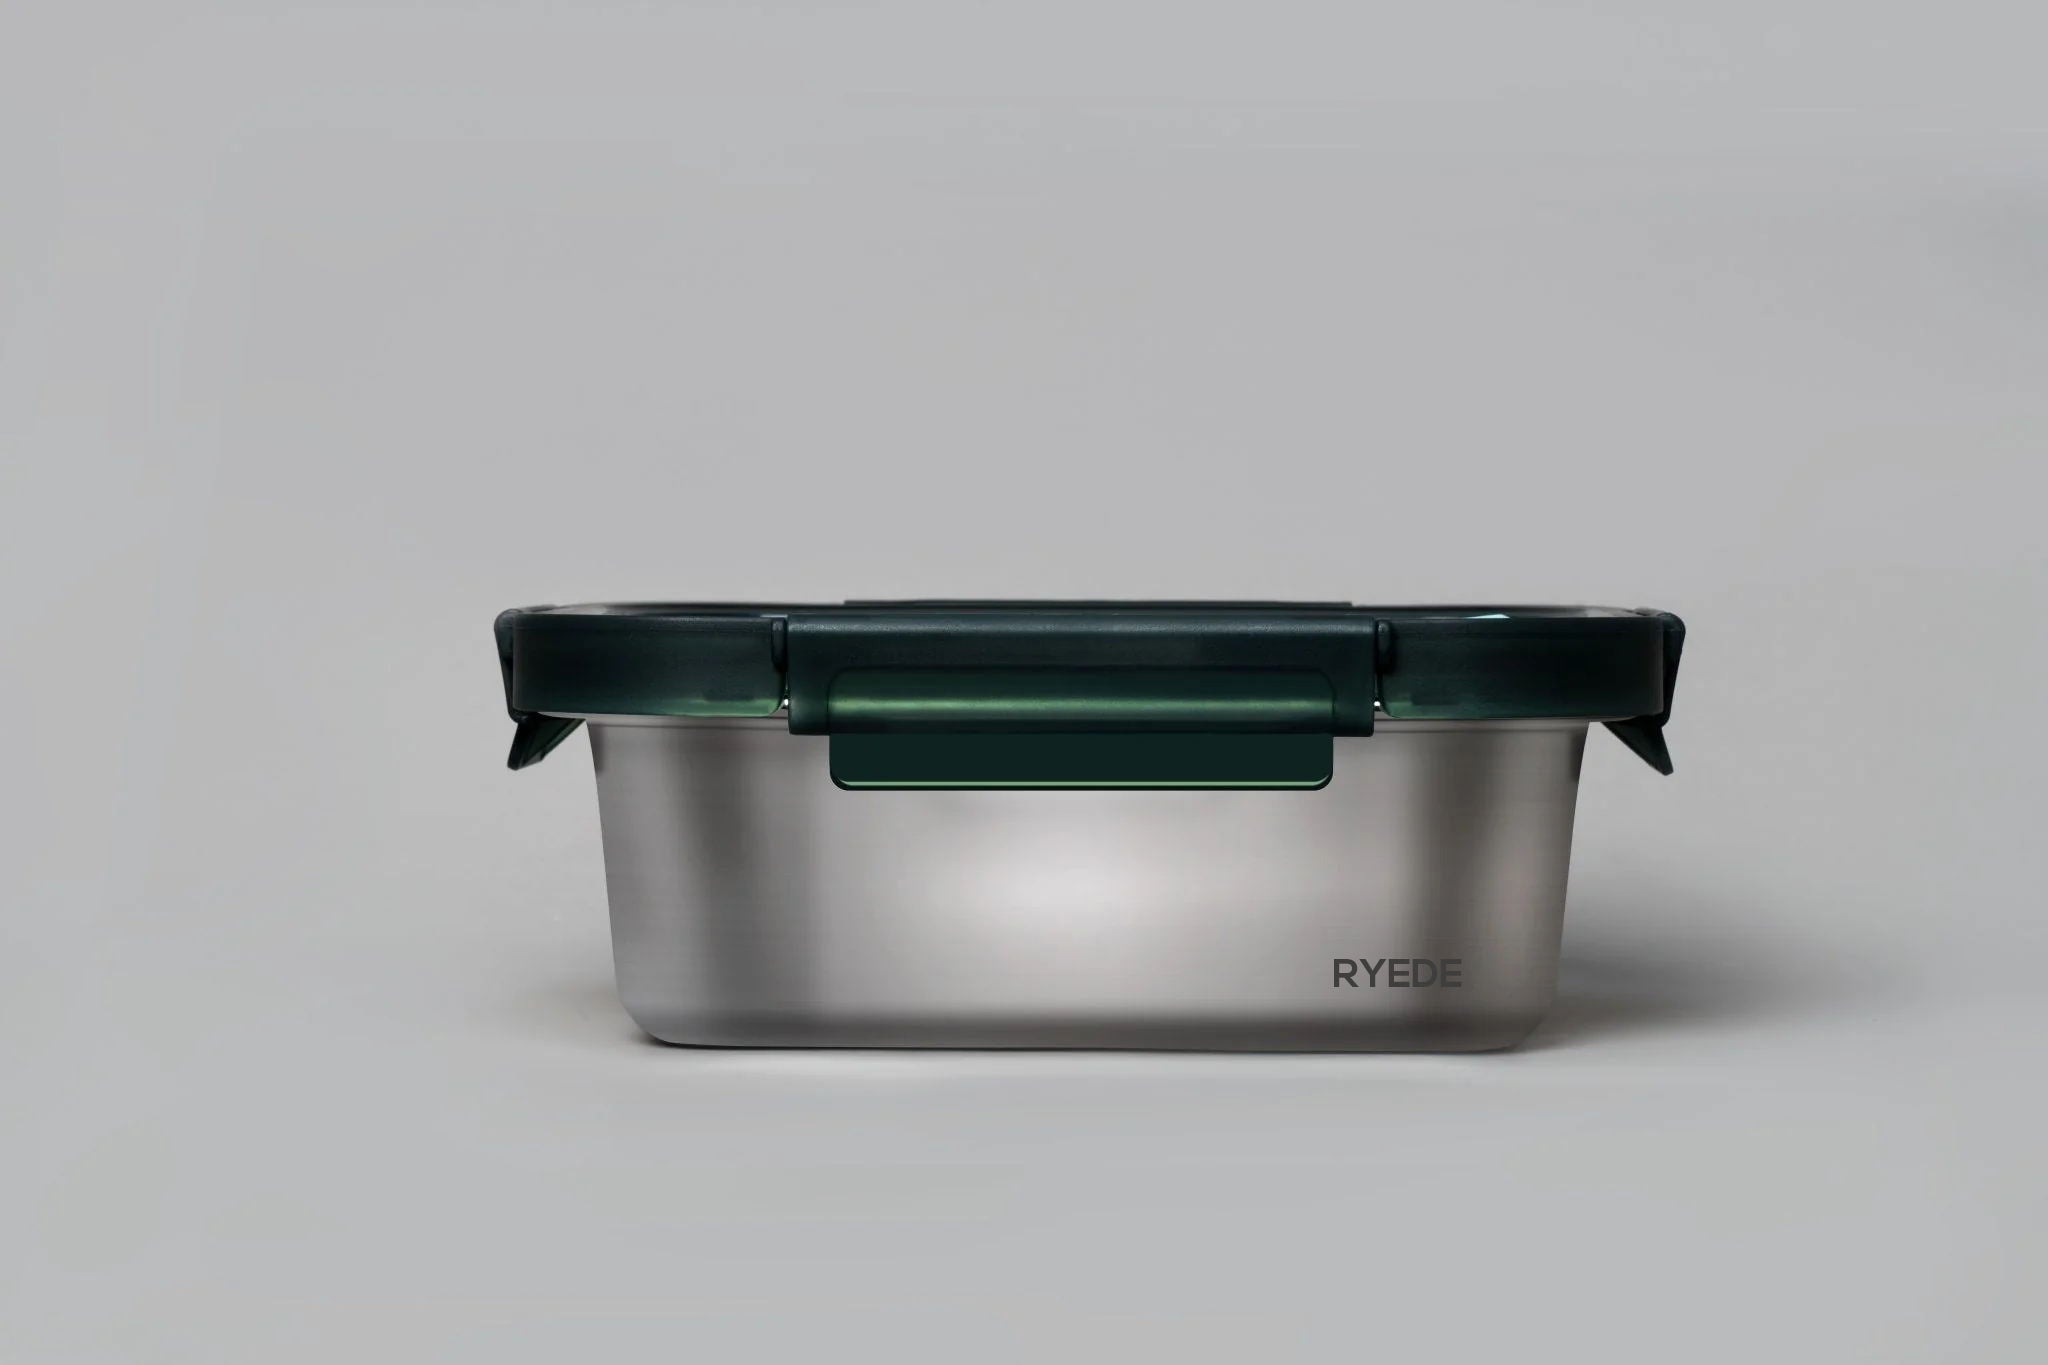 https://genicook.com/cdn/shop/products/ryede-square-microwave-safe-stainless-steel-container-600-800-mlgenicooksiv600sq-gr-437822.jpg?v=1677732803